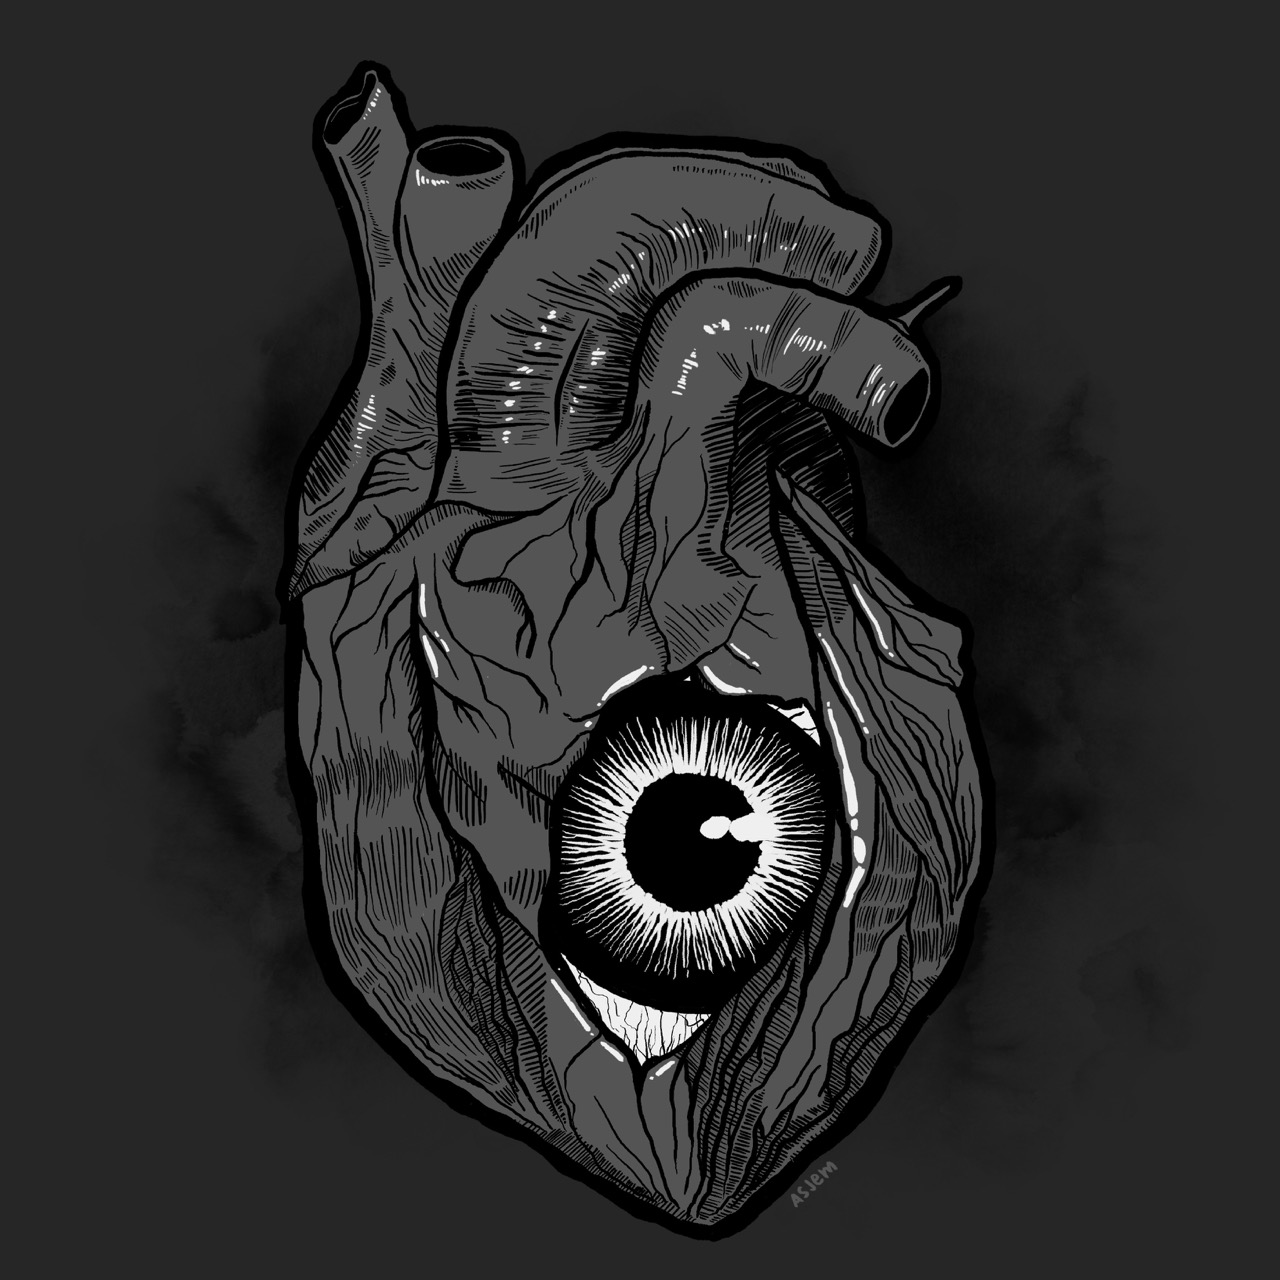 An illustration in pen-and-ink style of an anatomical heart. Part of it gapes open to reveal an eye.